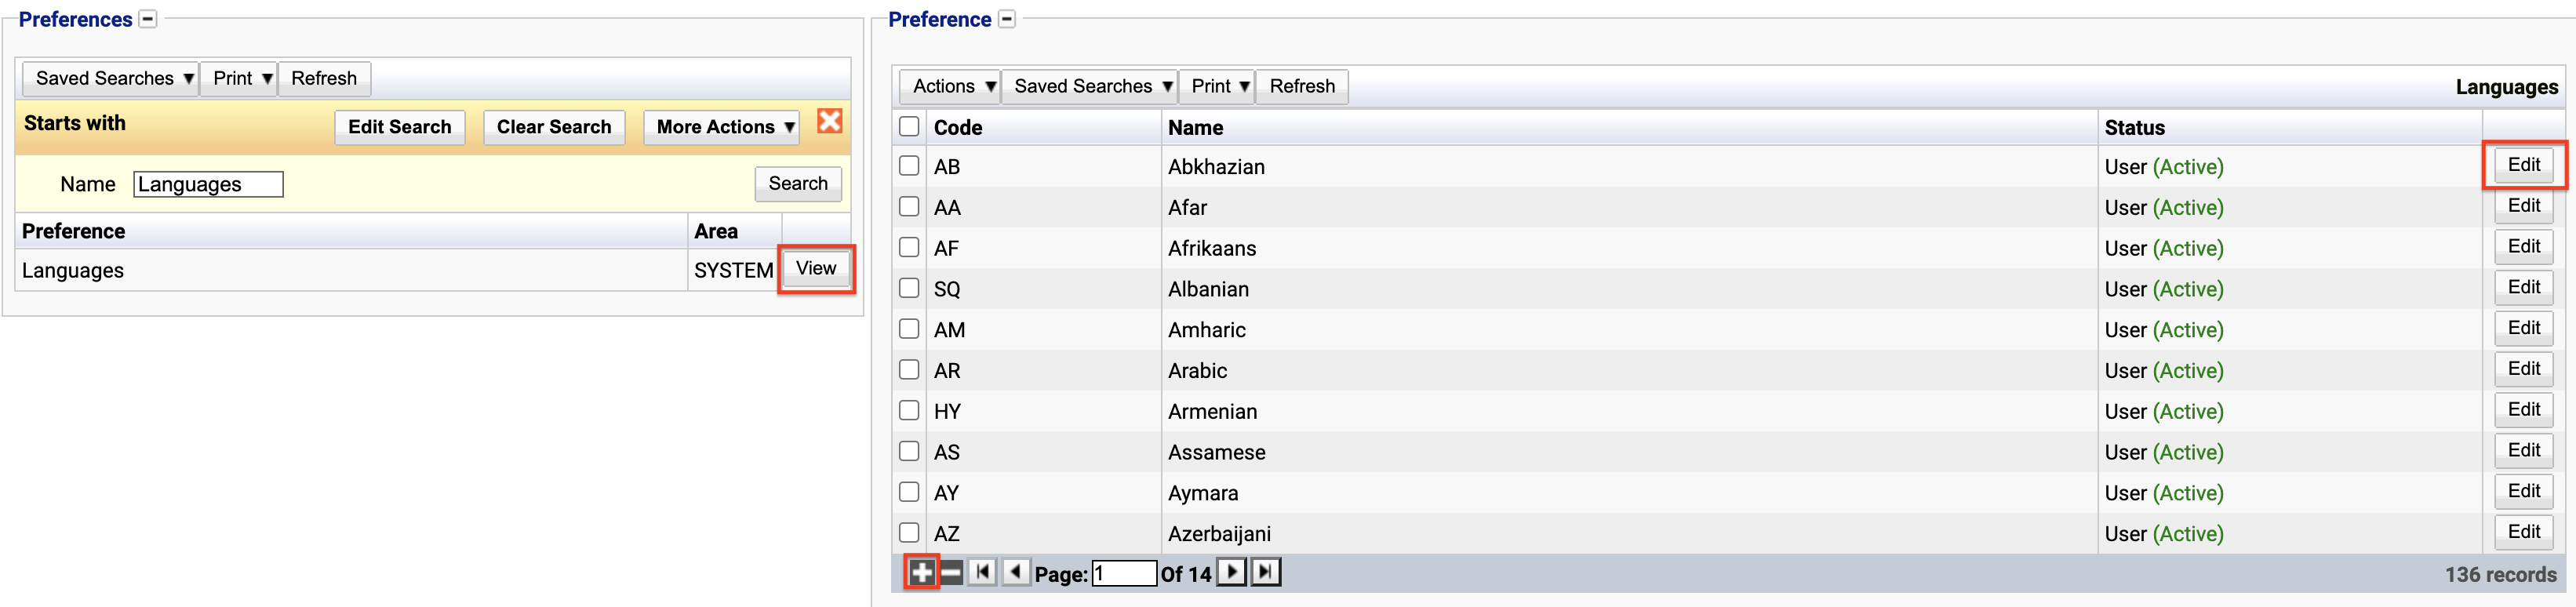 Finding the languages preference in the preference list.